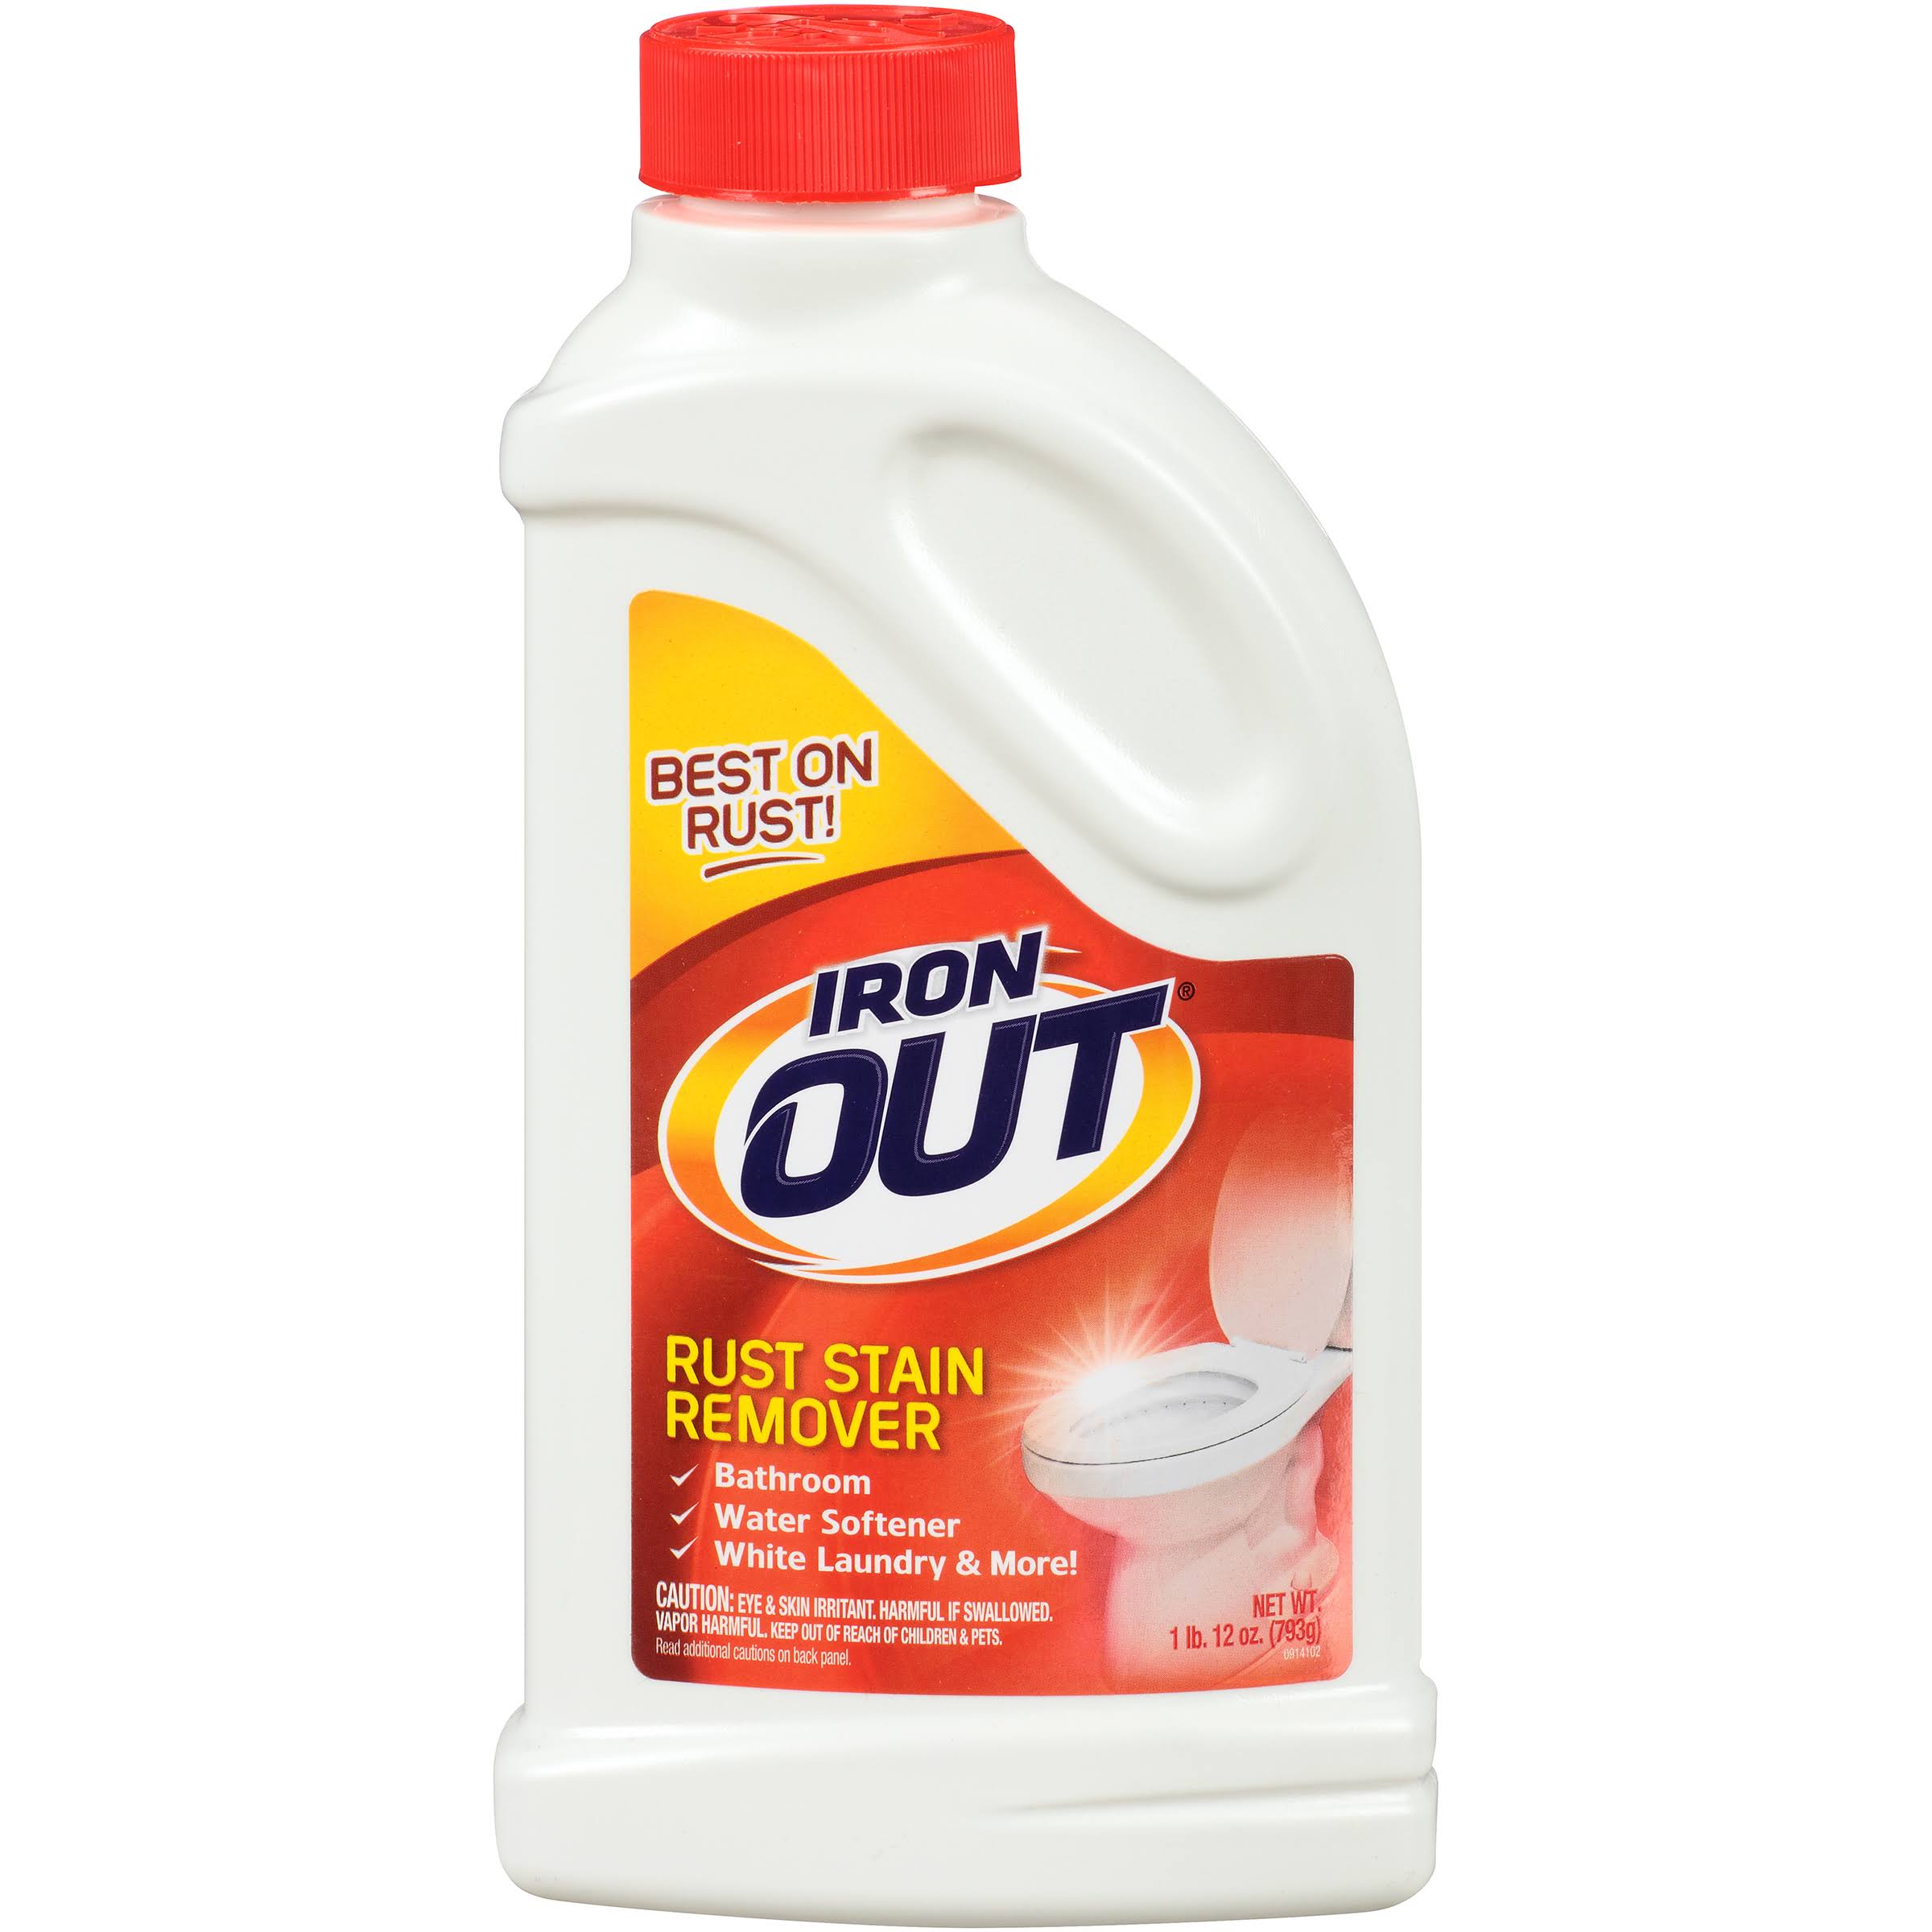 Iron Out Rust Stain Remover - 12 oz